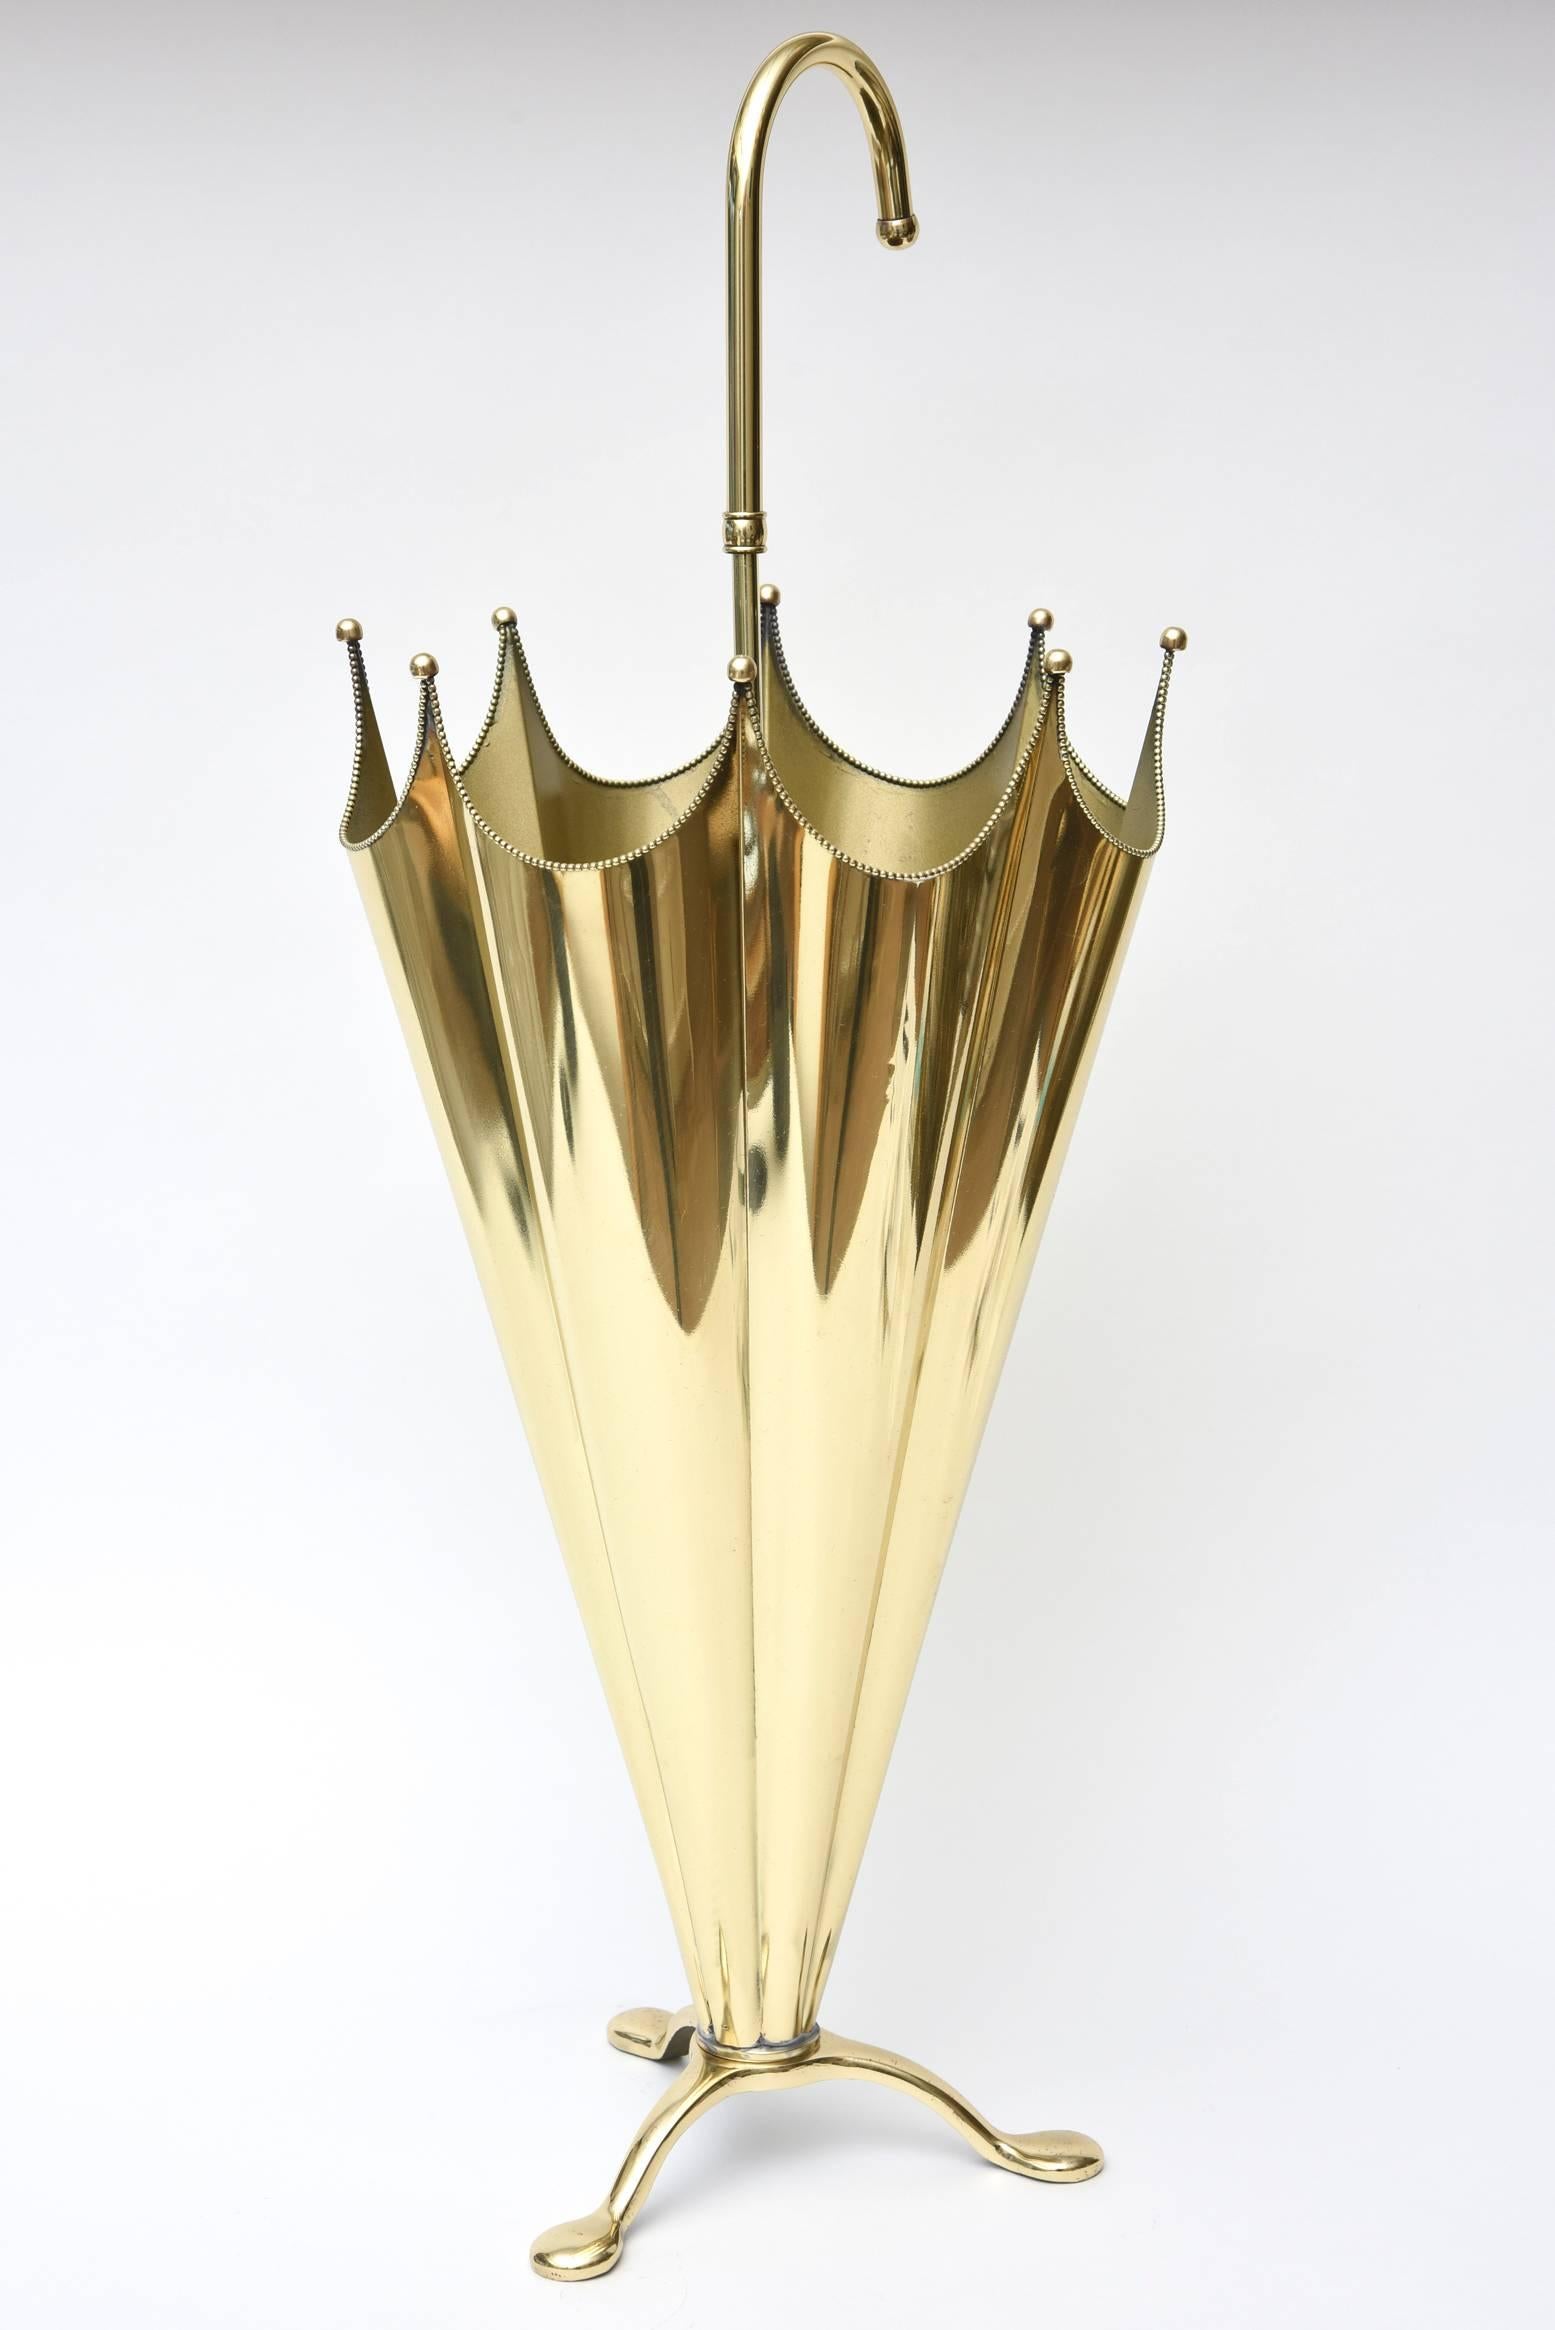 This solid polished brass Italian umbrella stand will make any door entrance/hallway stand out. It is chic and modern yet vintage. The balled brass
tips of the umbrella stand and the tiny balled scaled edges complete the form.
It is sturdy, solid